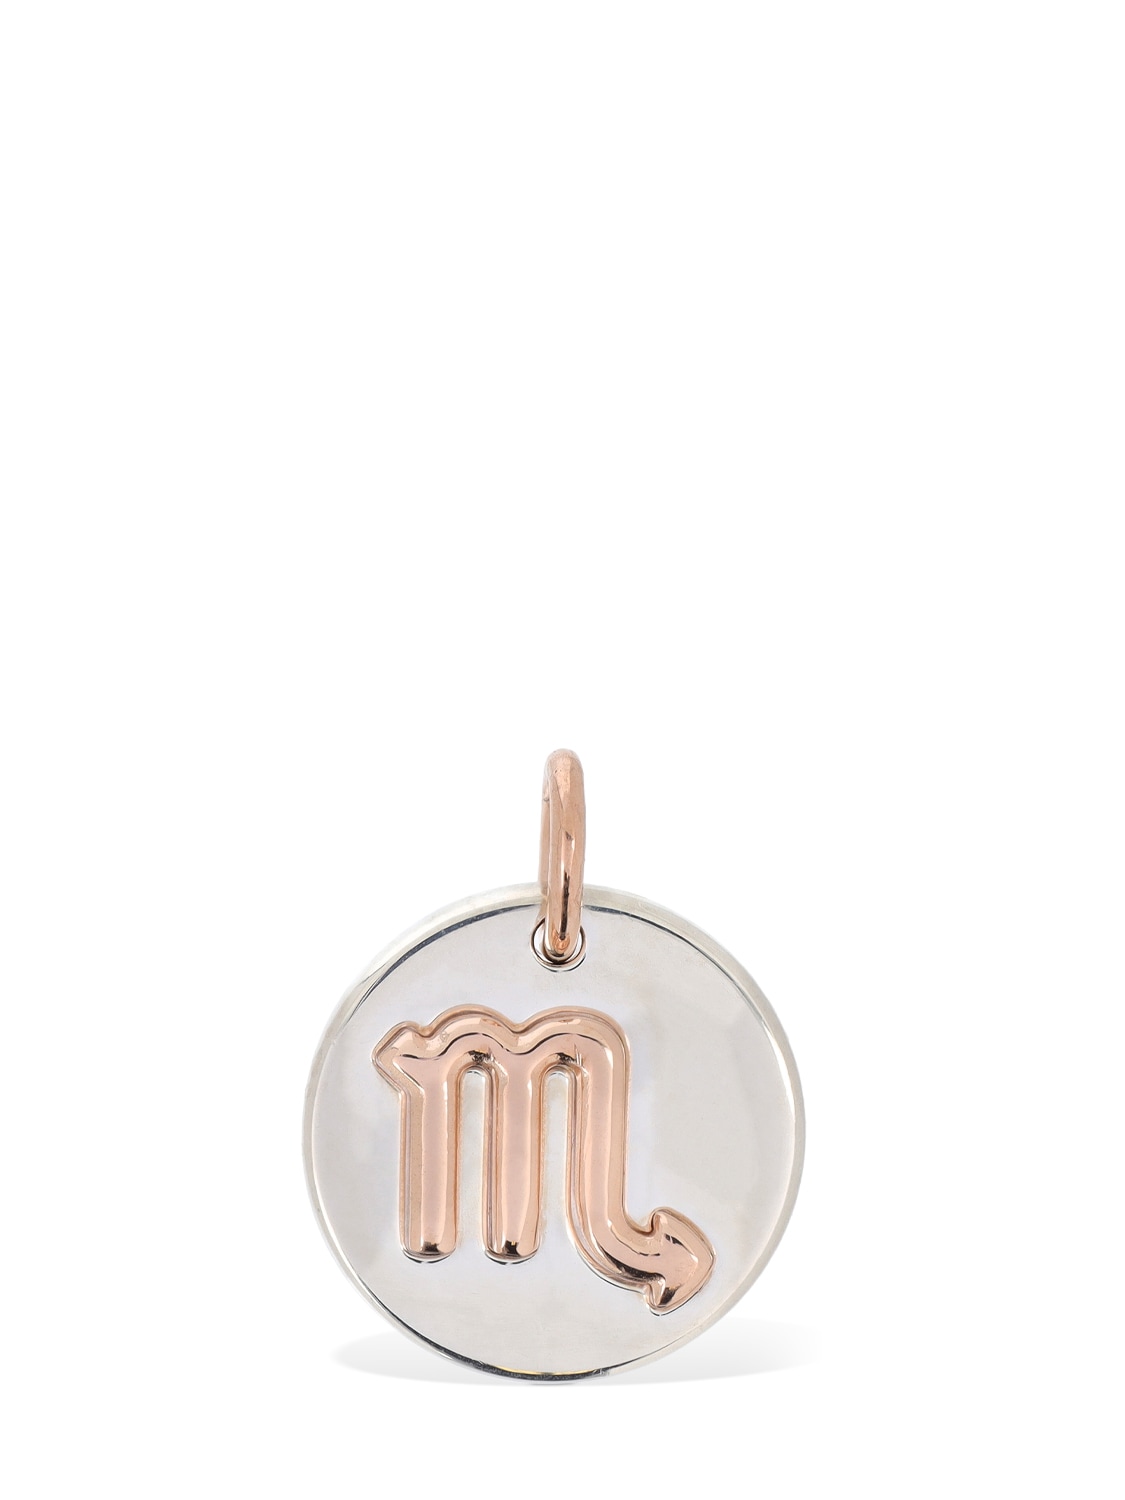 Image of 9kt Rose Gold & Silver Scorpio Charm